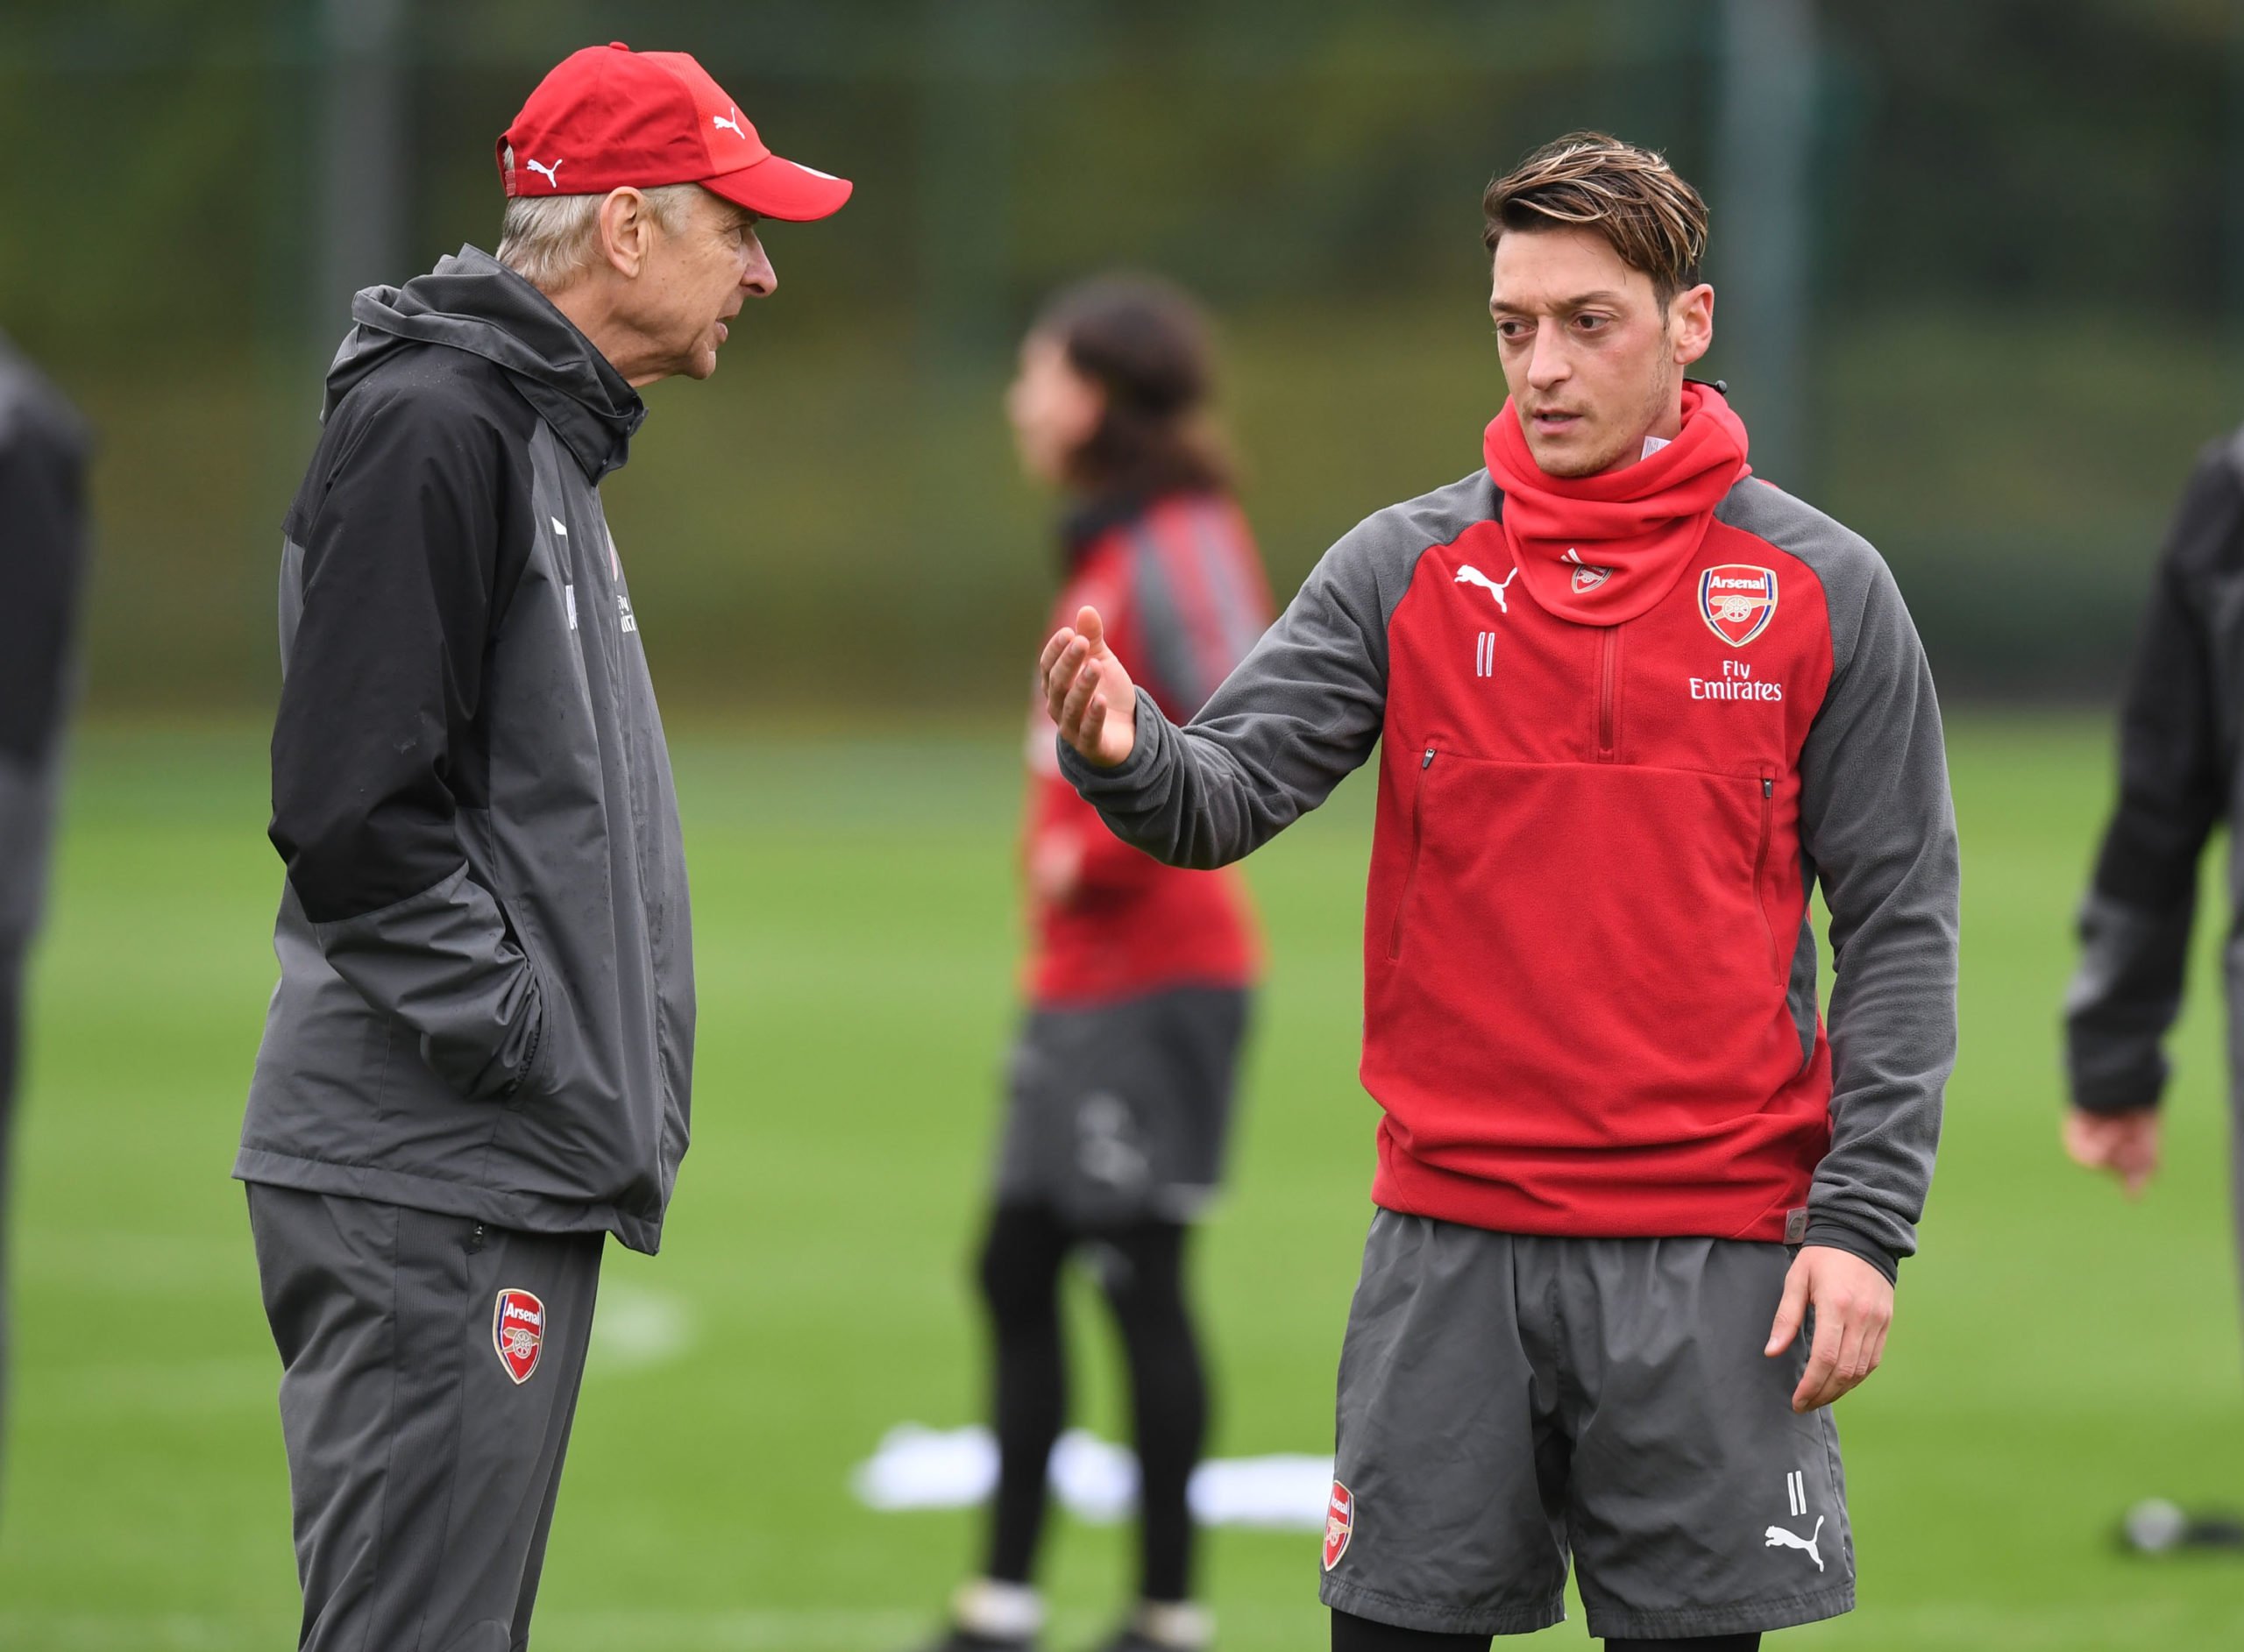 Lauren feels Ozil is more to blame than Arsenal for player's status at club